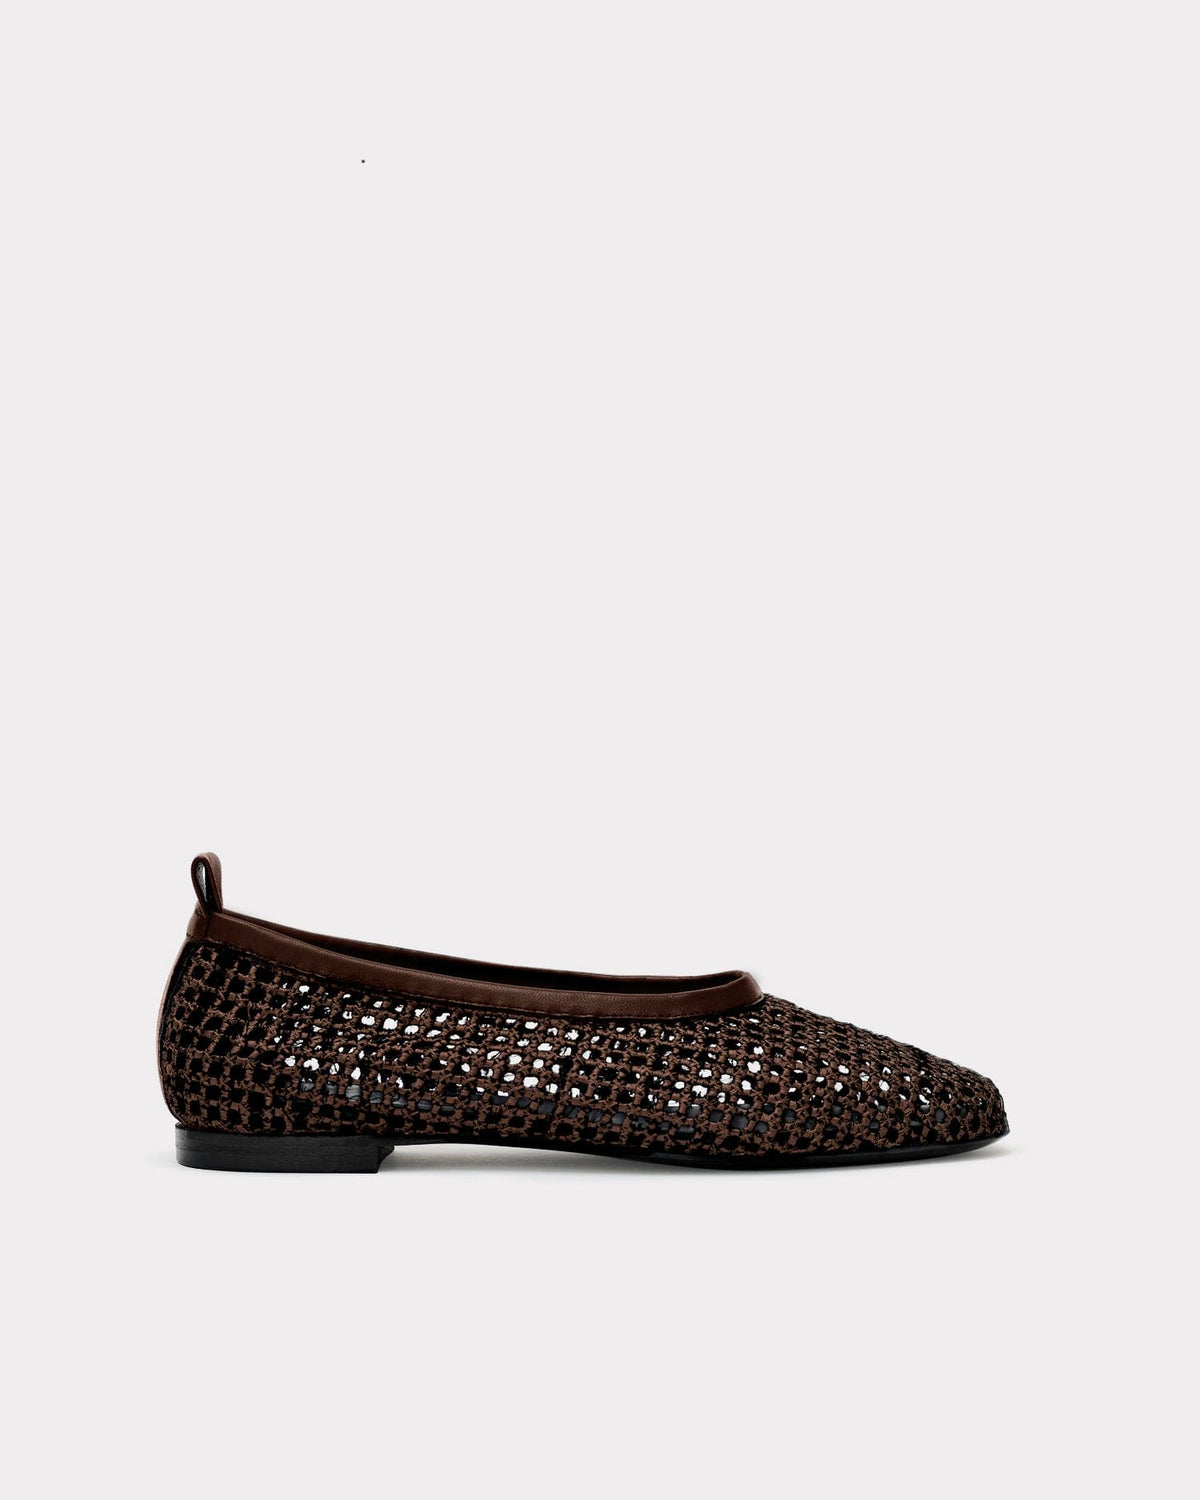 The Foundation Flat - Chocolate Woven Shoes ESSĒN Brown Sustainable Satin 35